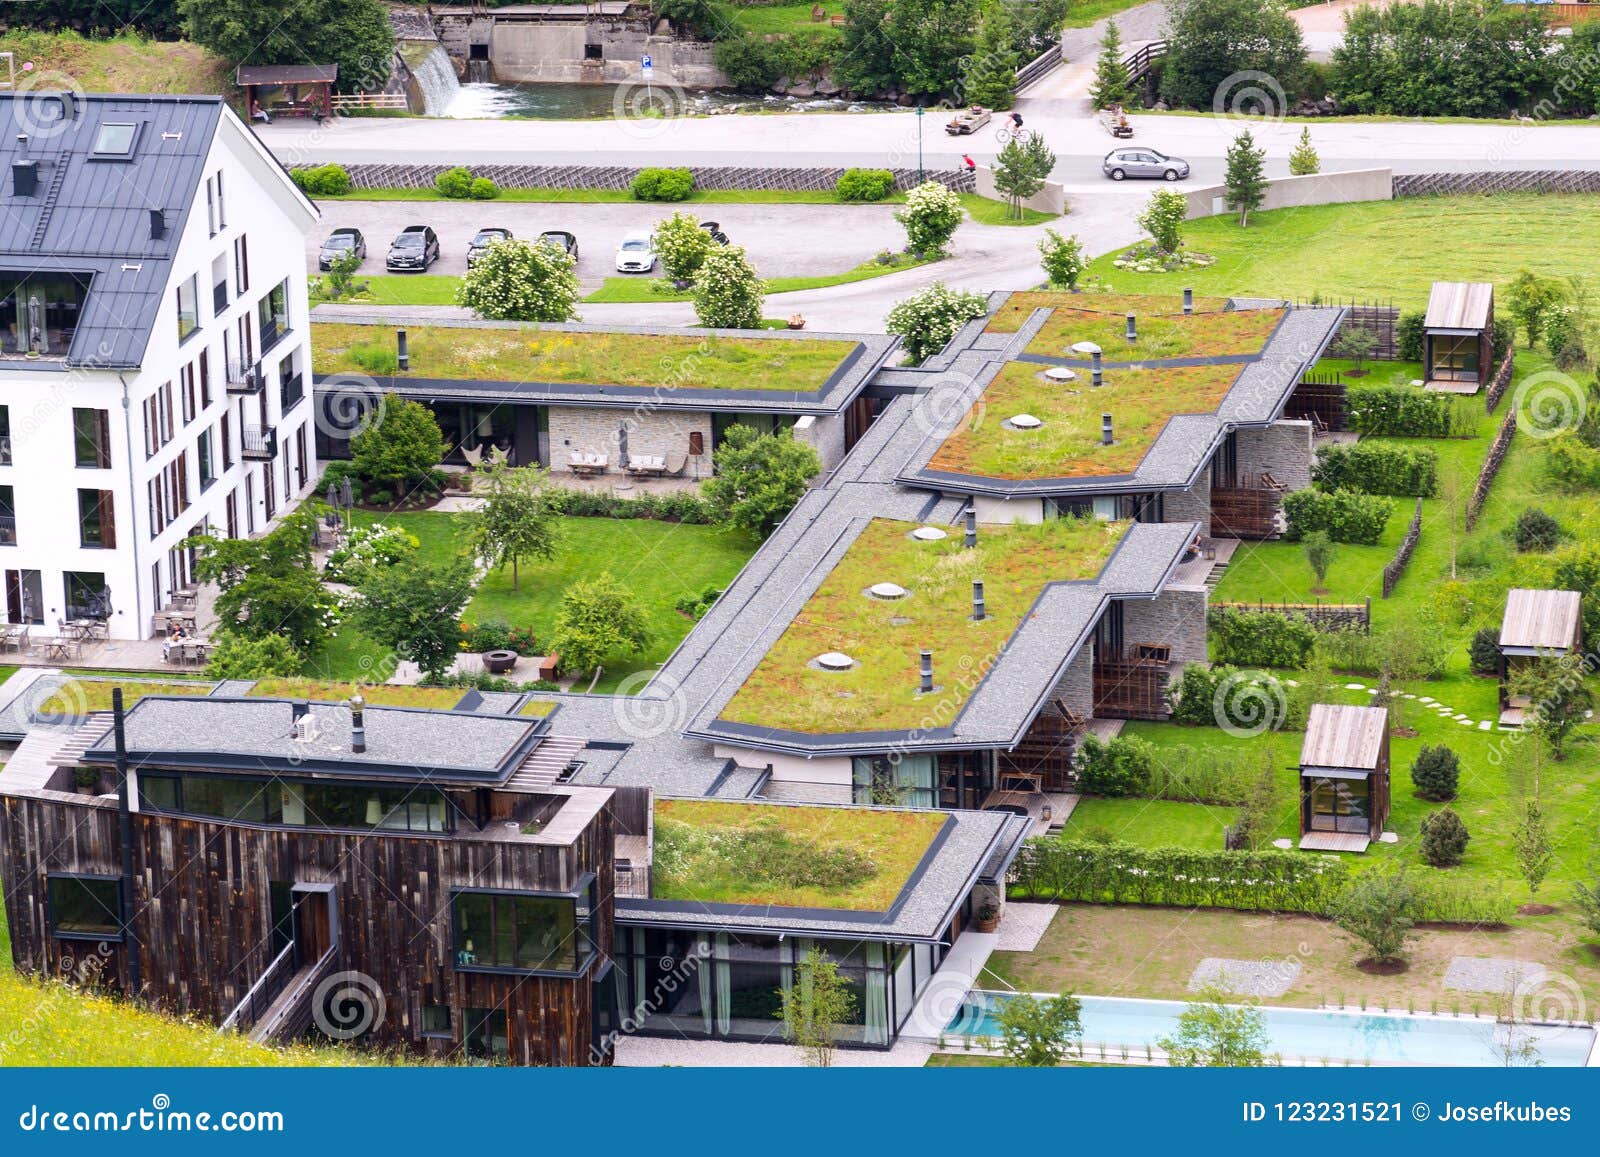 aerial view of extensive green living sod roofs with vegetation